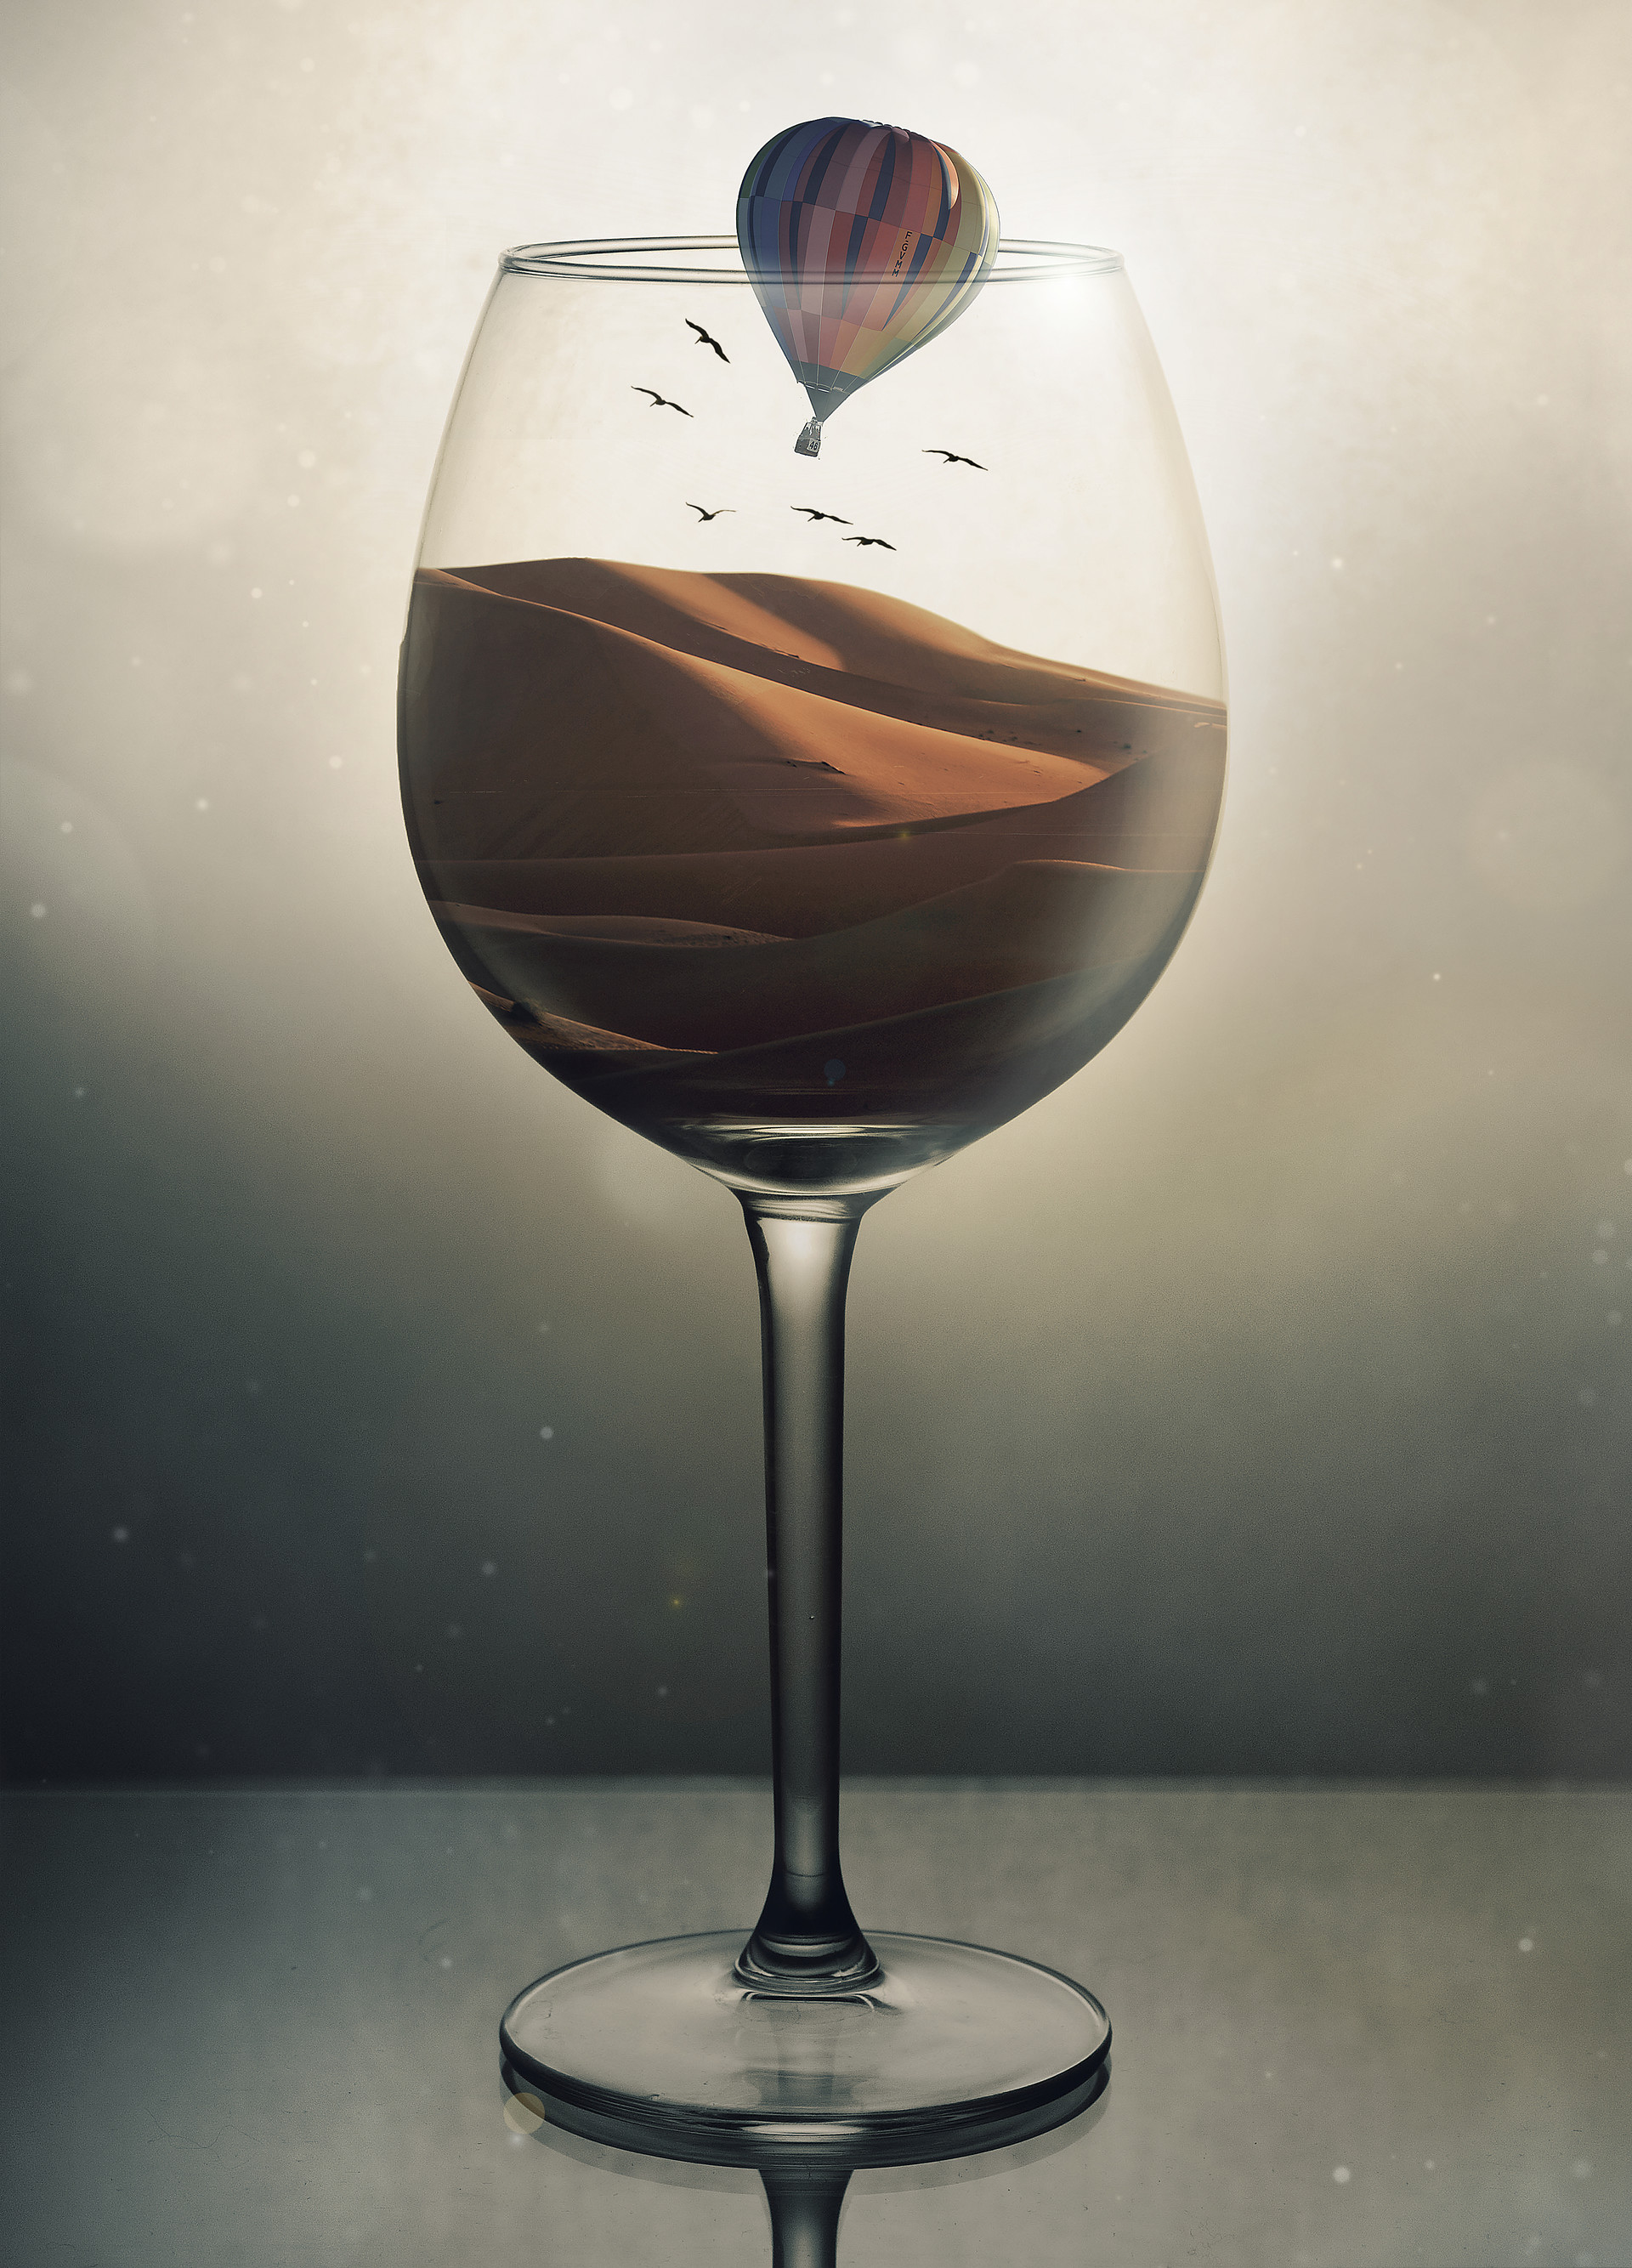 156994 download wallpaper miscellanea, birds, sand, desert, miscellaneous, balloon, illusion, wineglass, goblet screensavers and pictures for free